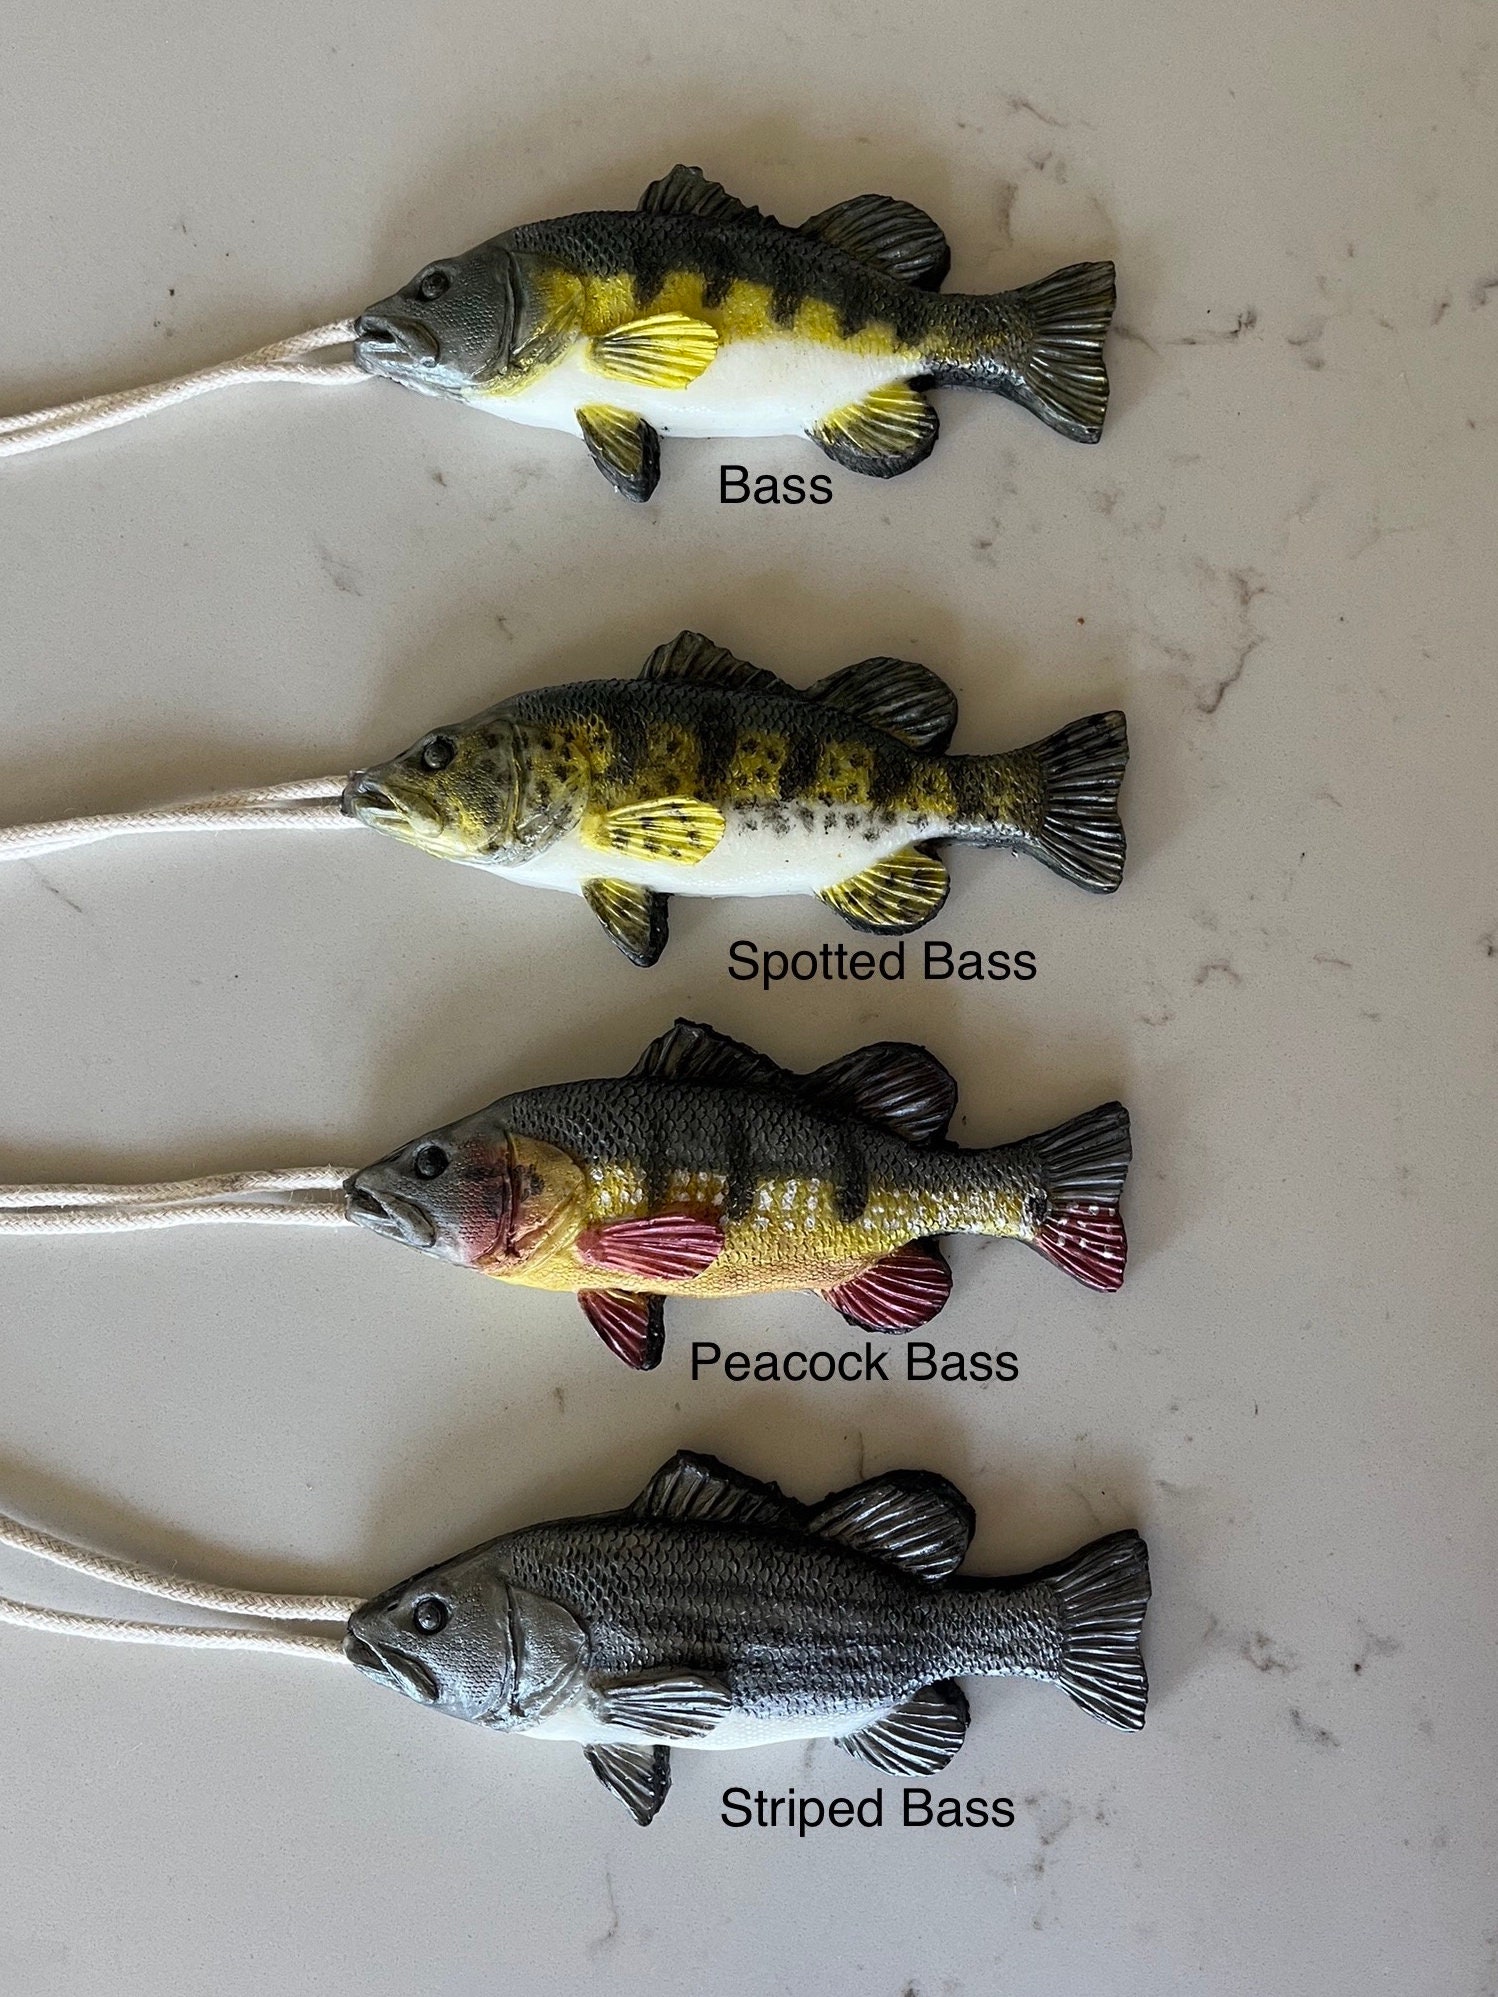 Fish Soap on a Rope Realistic Hand Painted Fun Gift for Outdoorsmen,  Fisherman, Adults Kids 